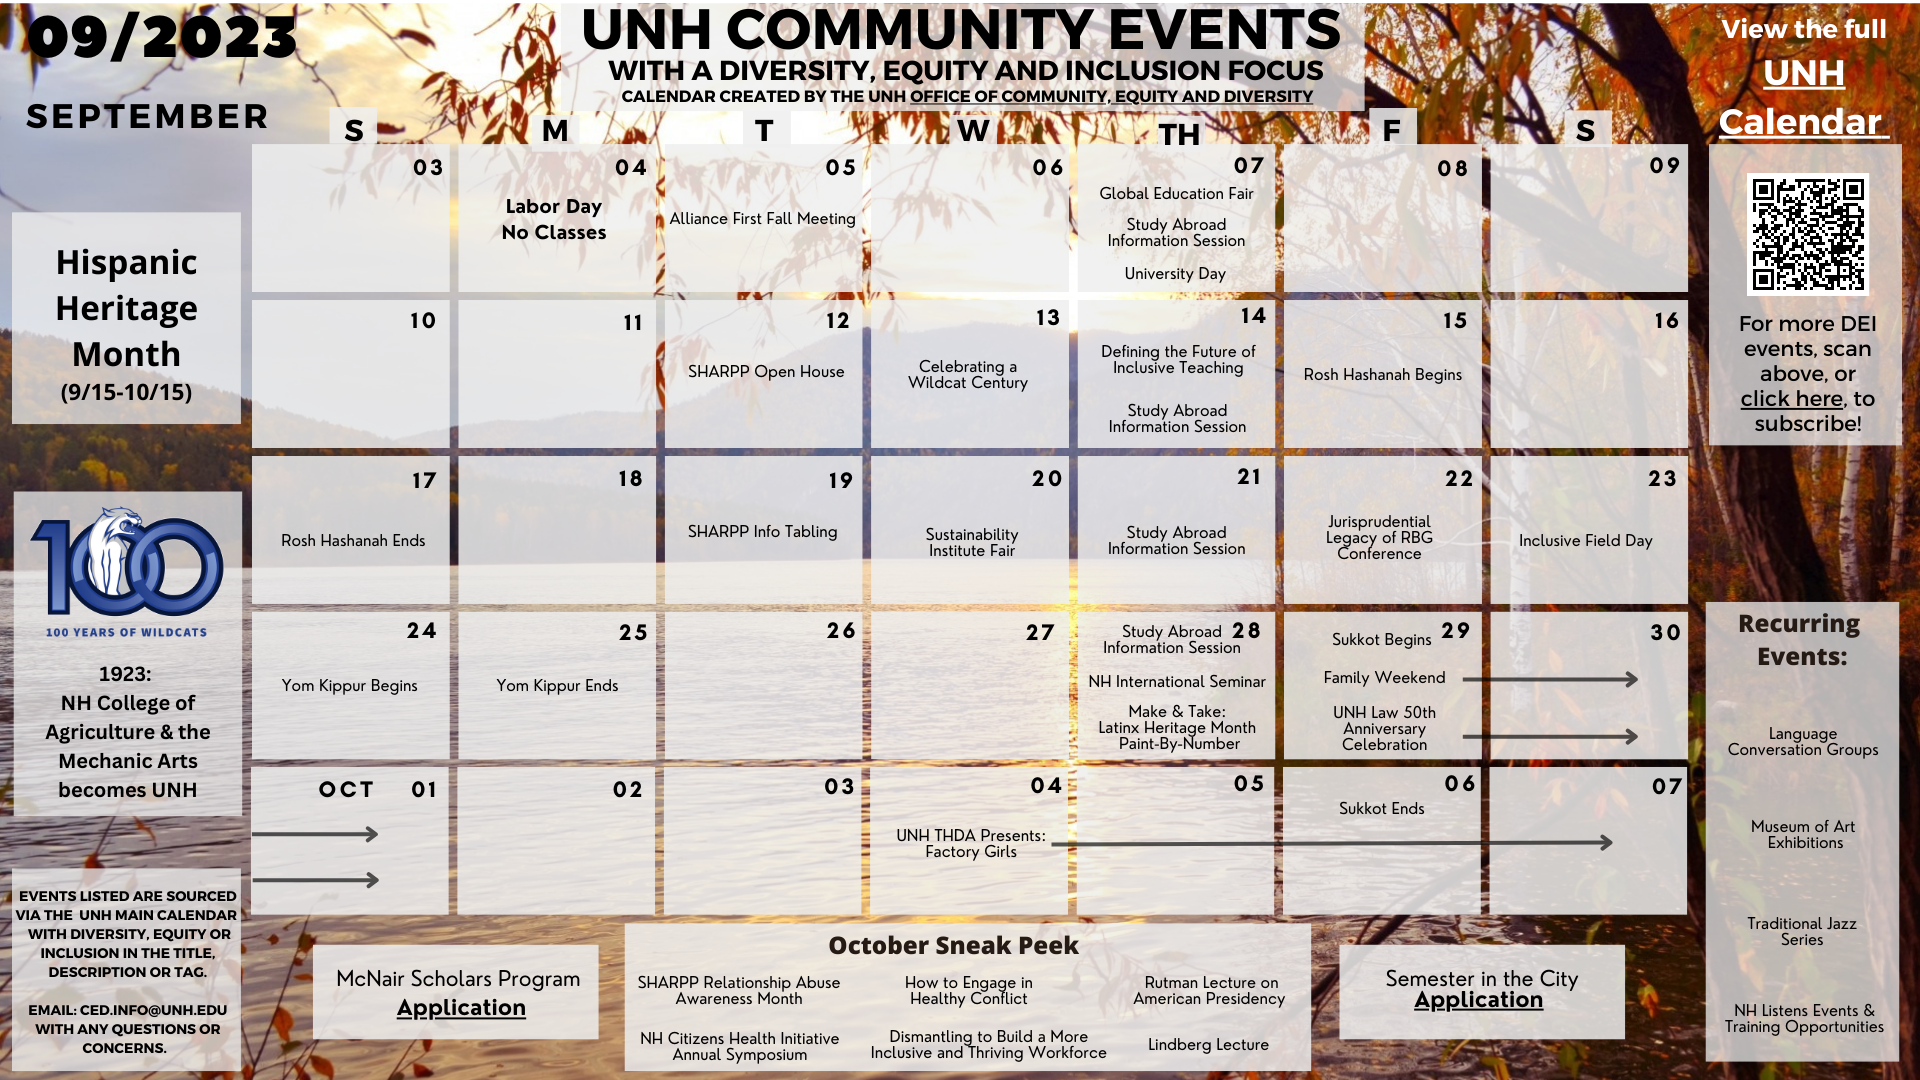 Calendar highlighting events the UNH community is sponsoring related to diversity, equity and inclusion for the month of March 2023.